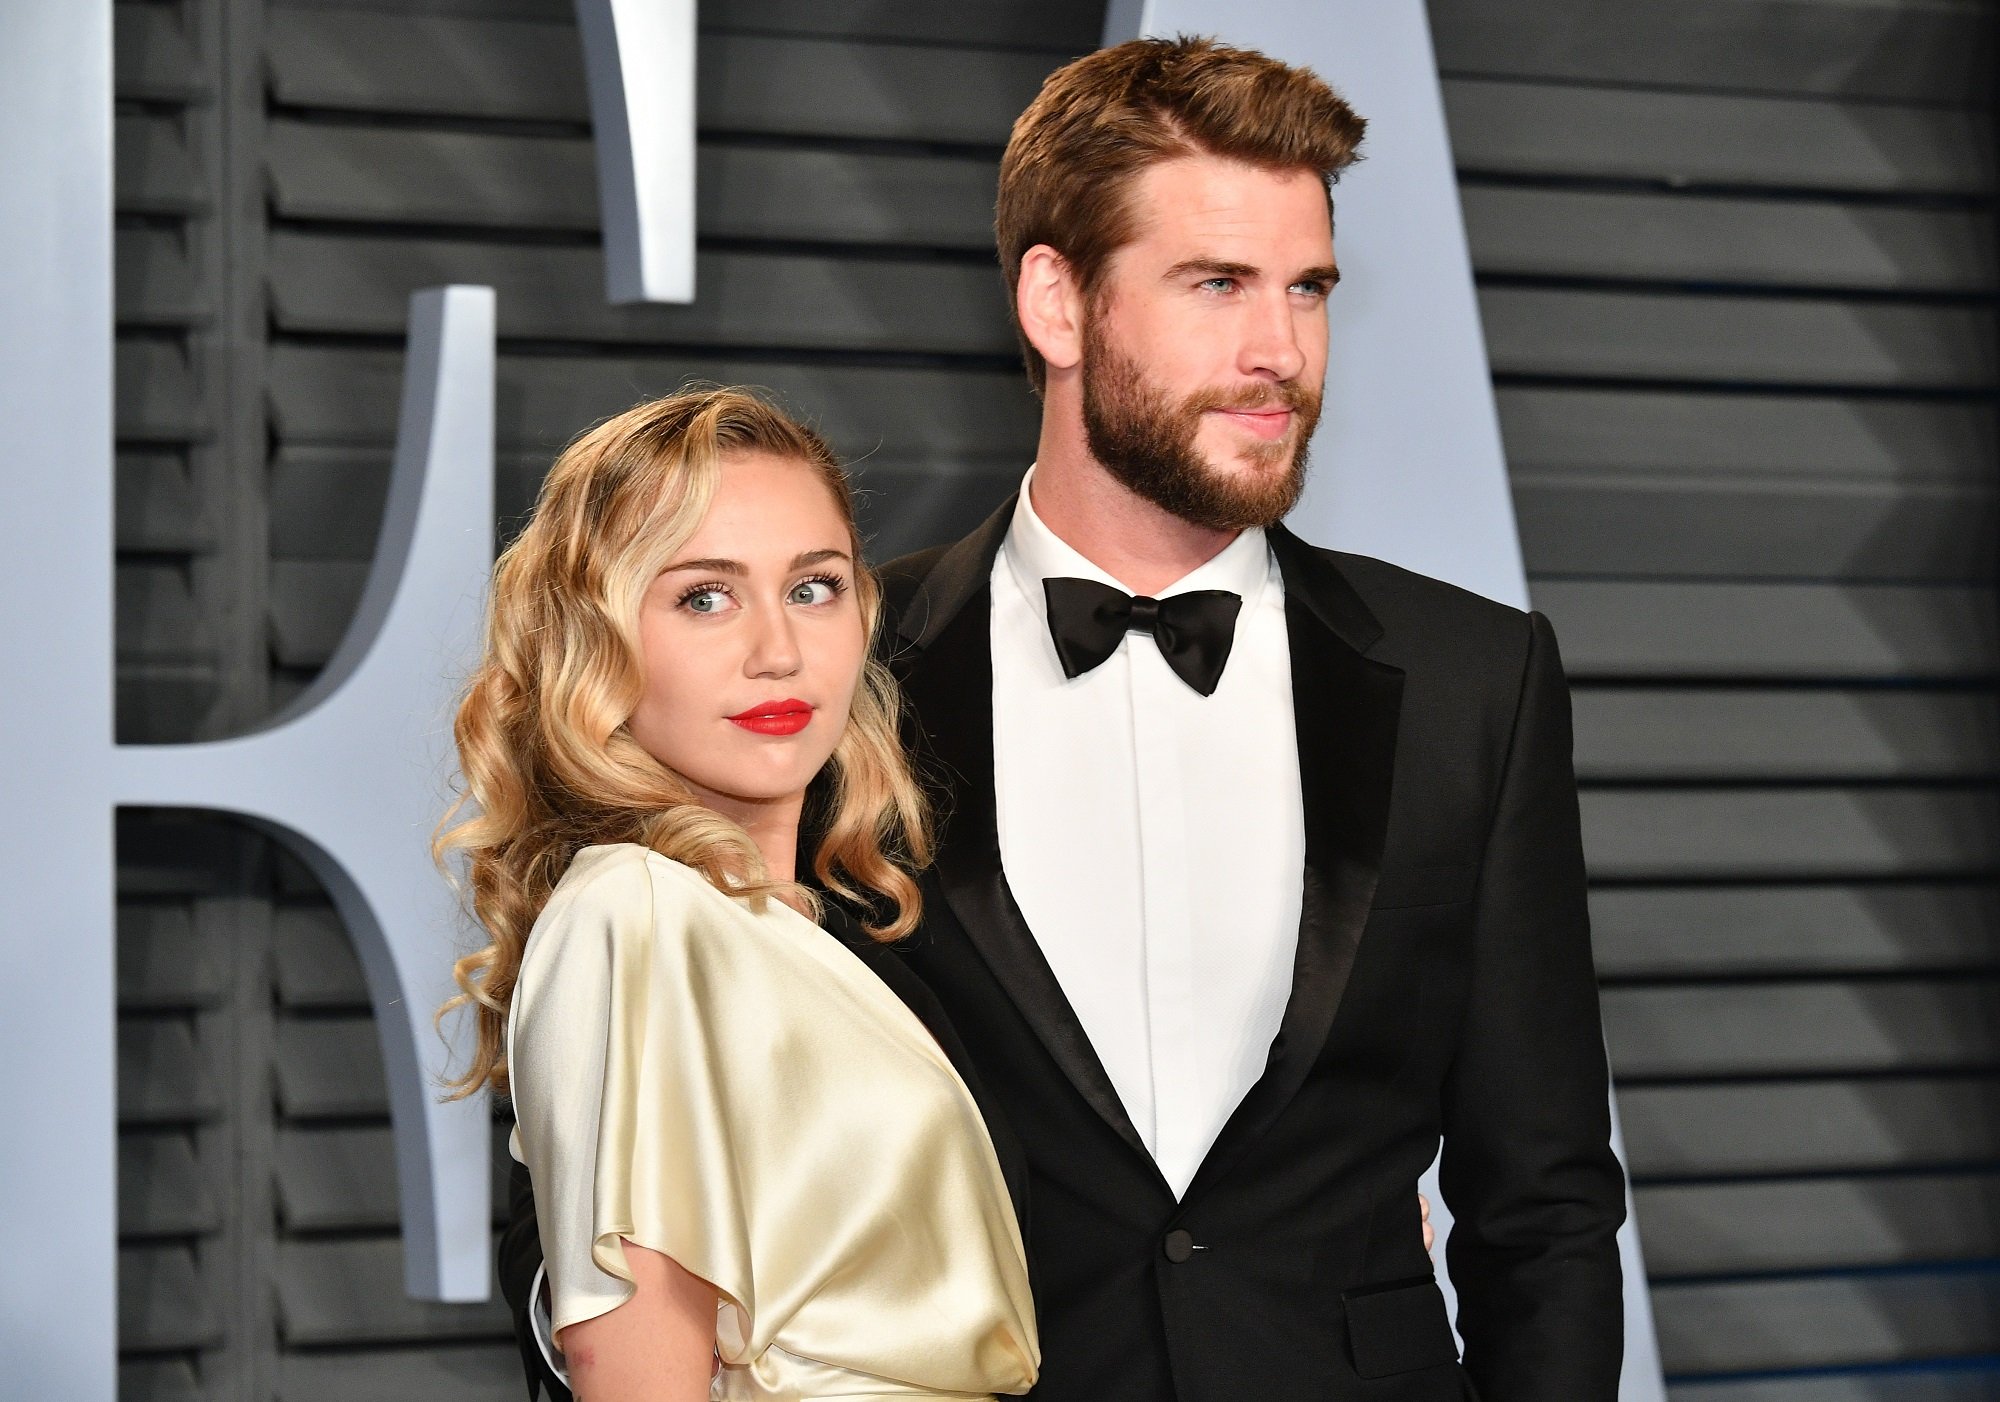 Miley Cyrus (L) and Liam Hemsworth attend the 2018 Vanity Fair Oscar Party on March 4, 2018 in Beverly Hills, California.